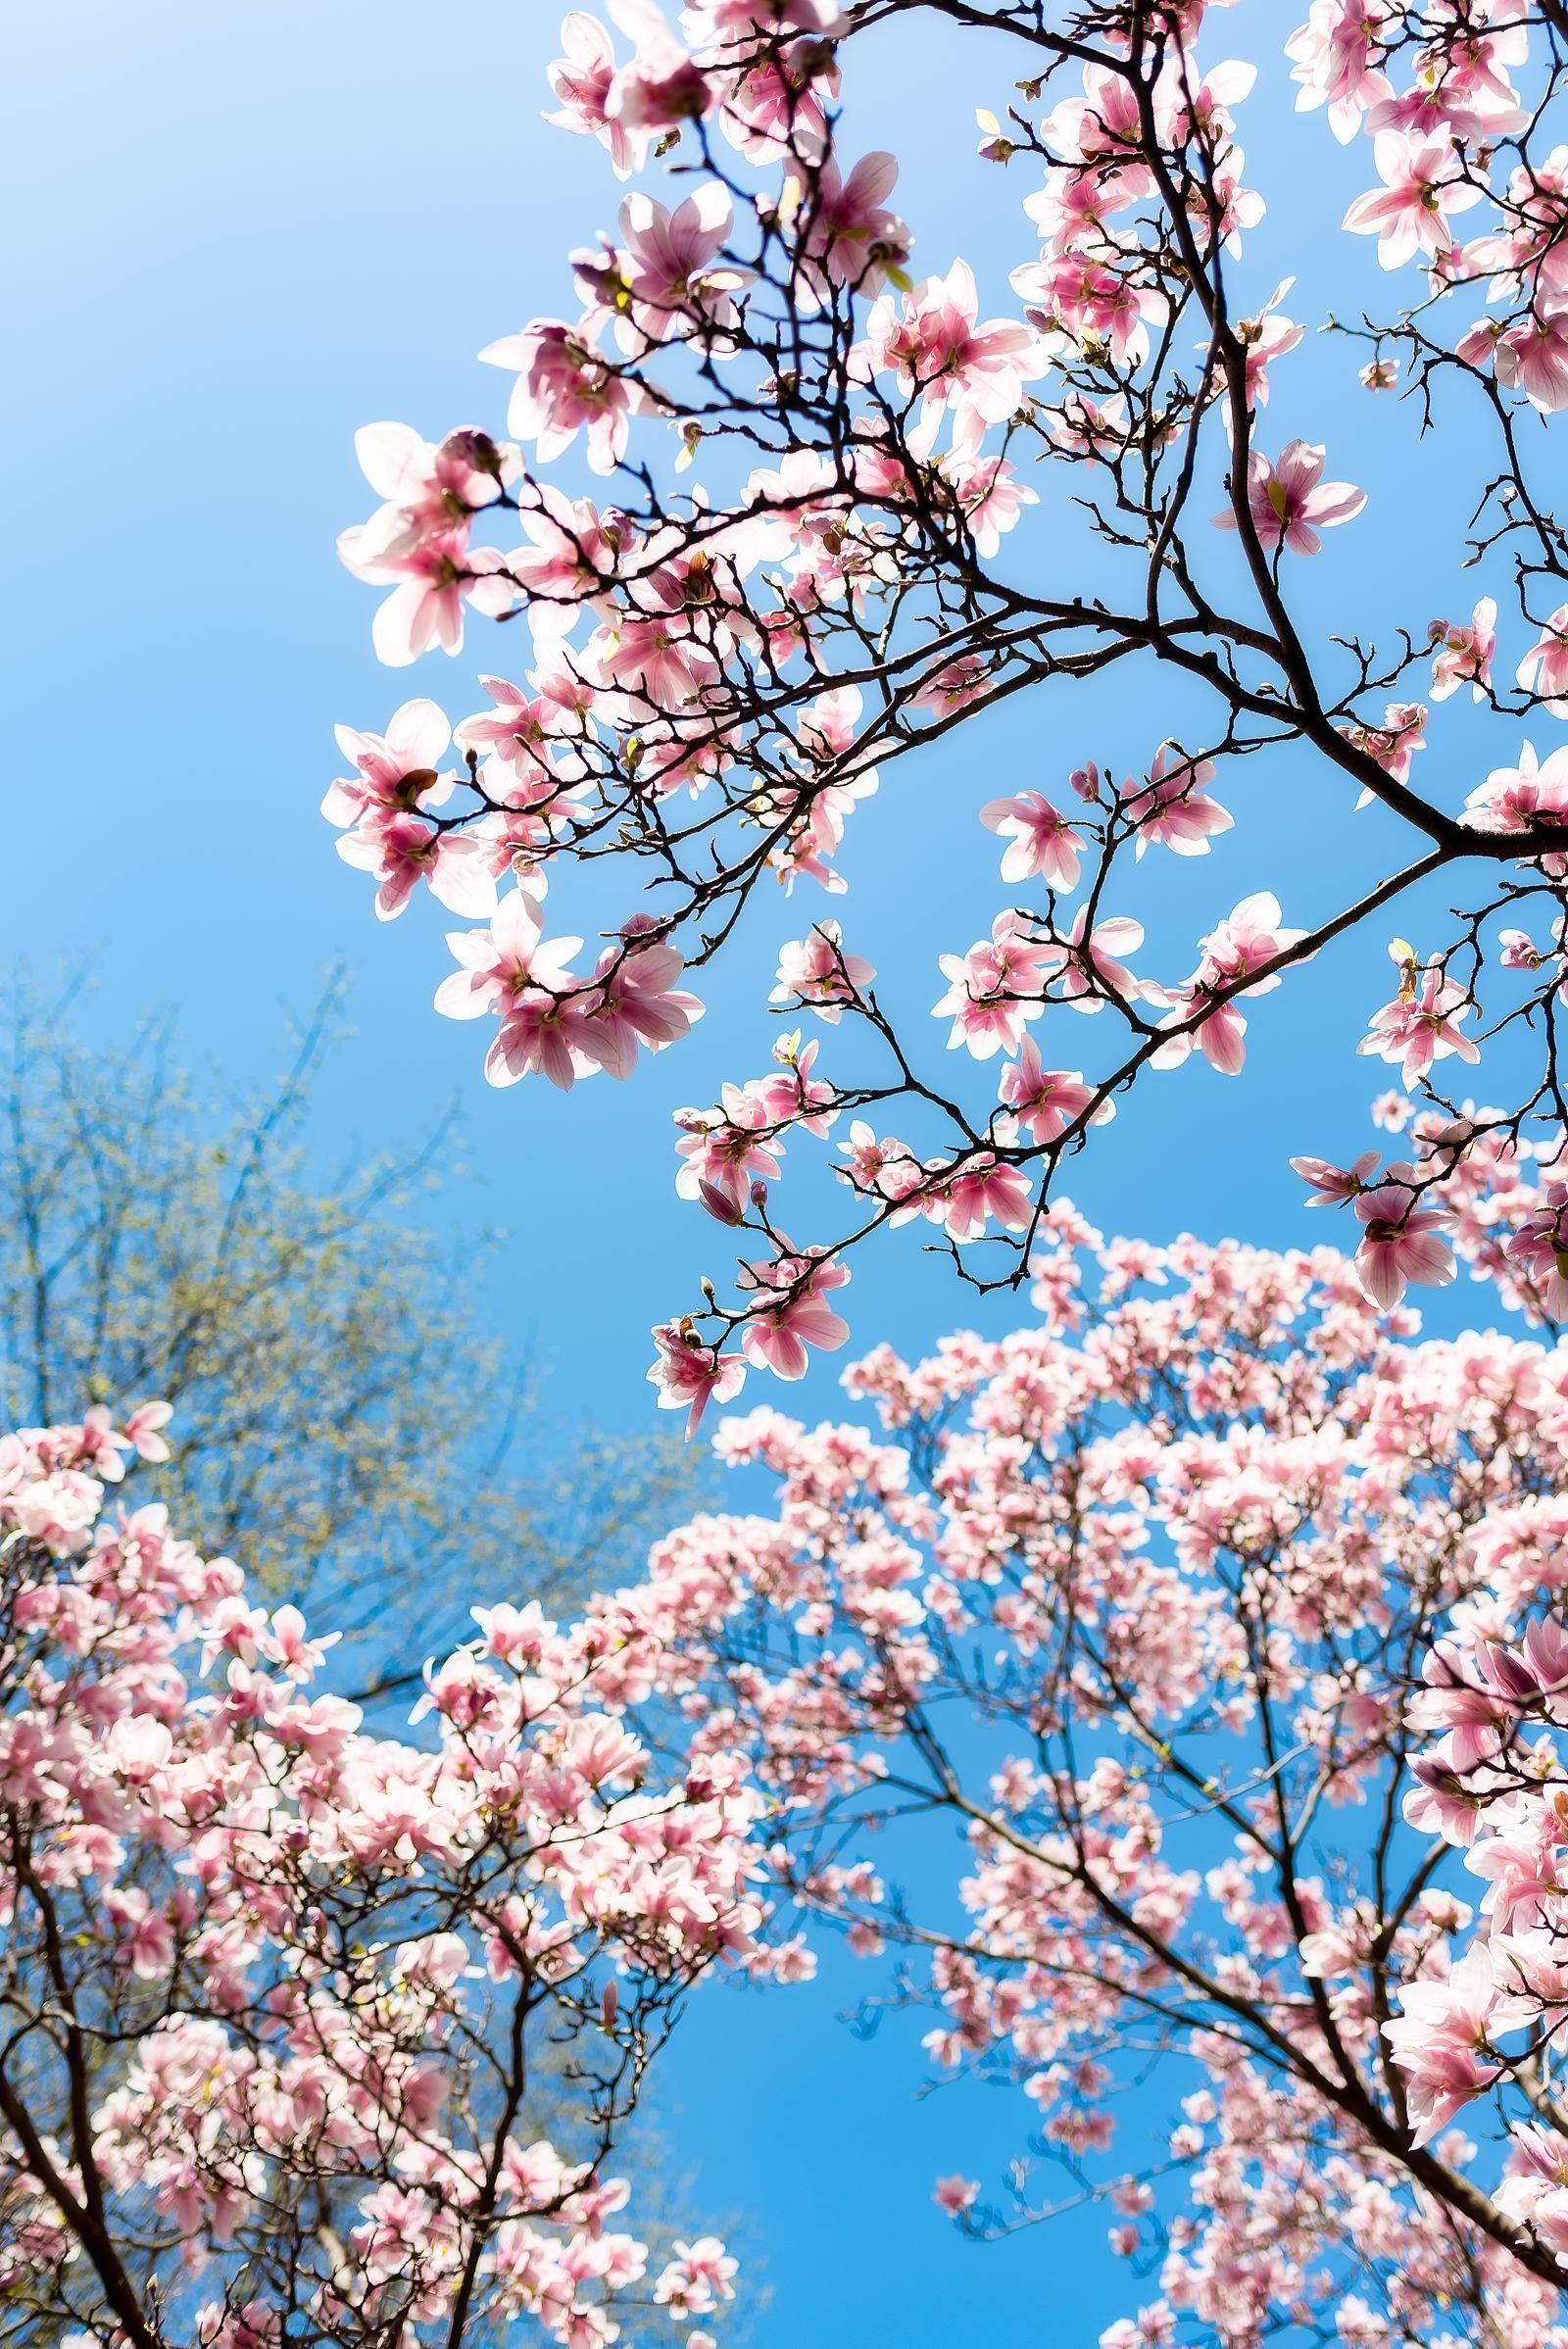 Aesthetic Cherry Blossoms Wallpapers - Top Free Aesthetic Cherry Blossoms Backgrounds